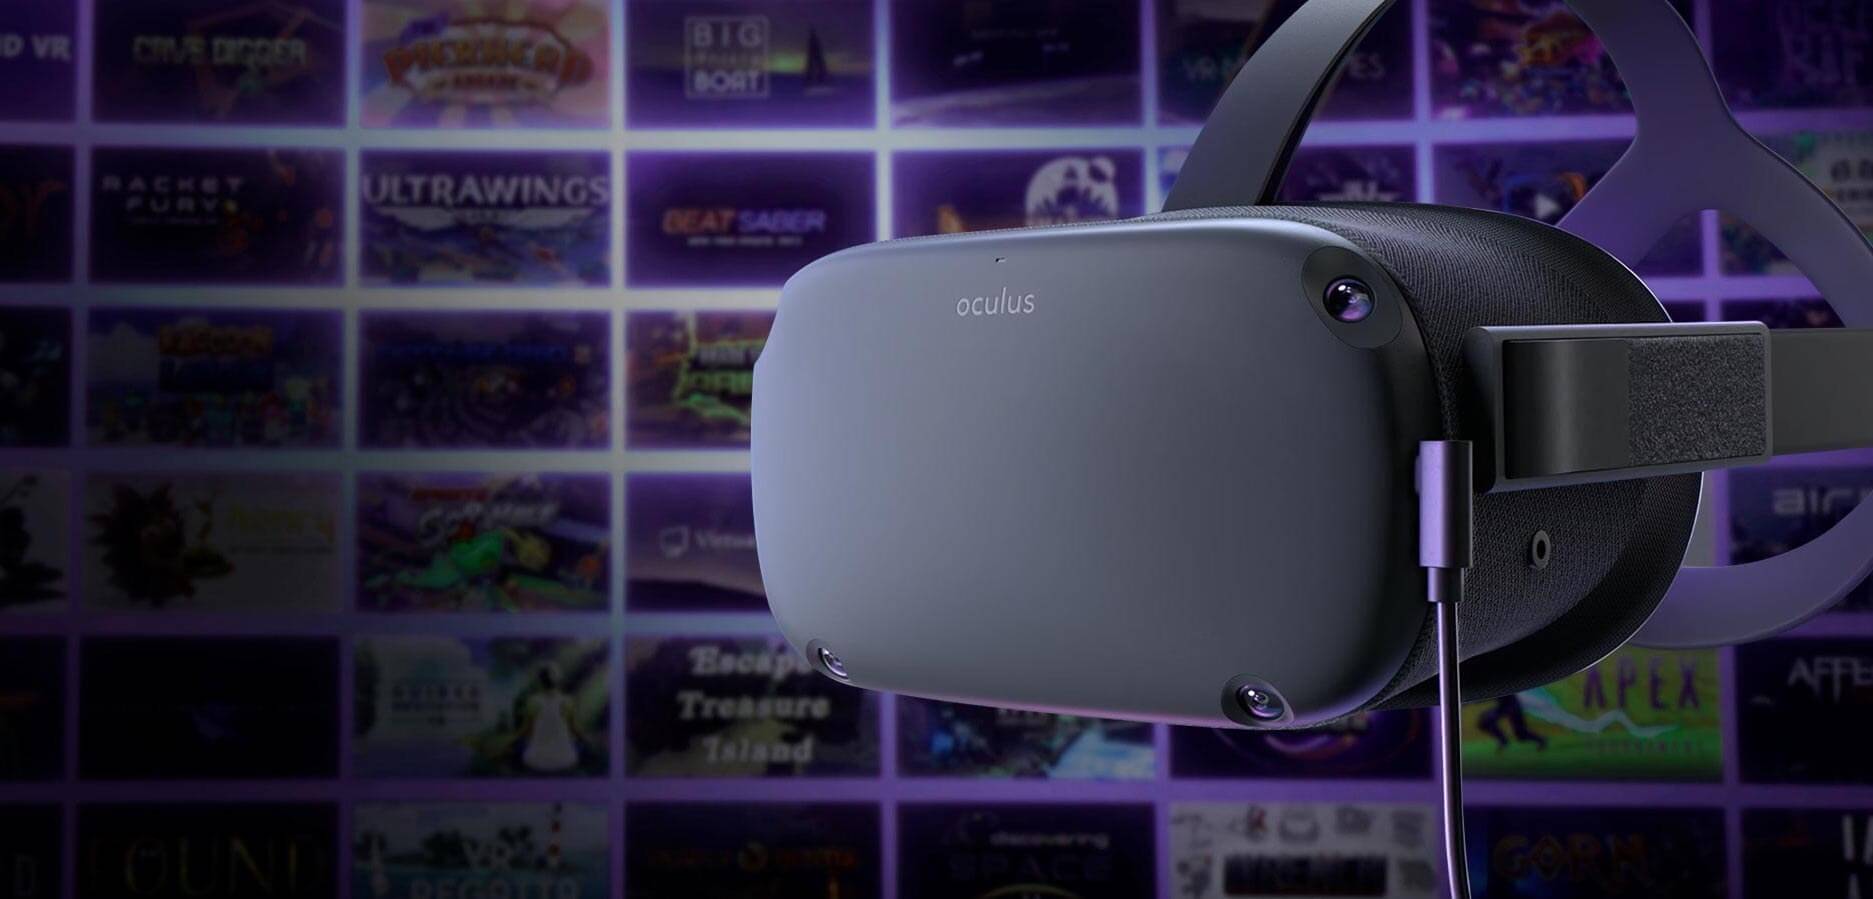 Meta is ending support for the original Oculus Quest VR